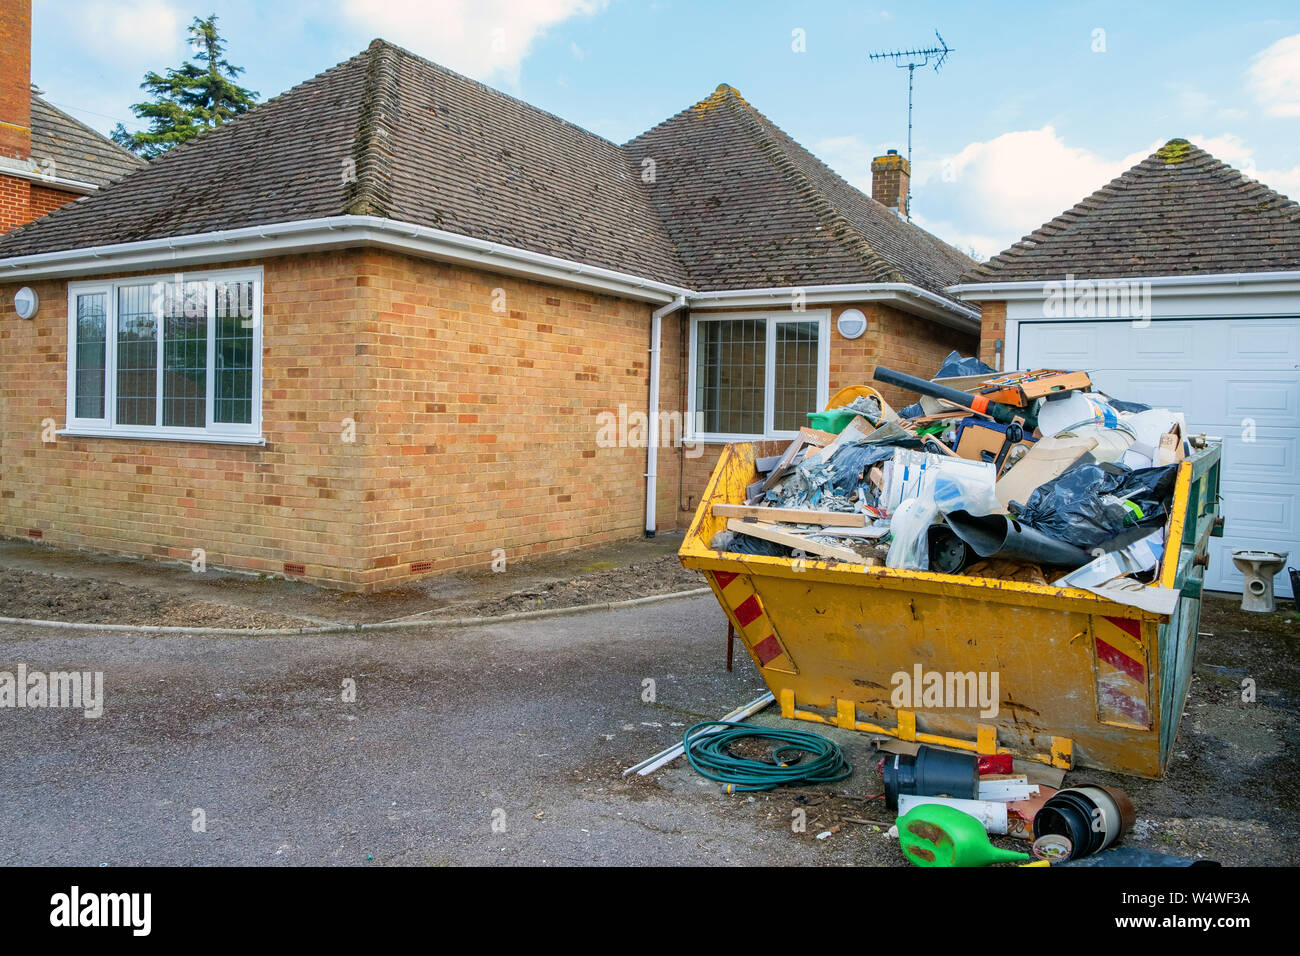 A full yellow rubbish skip on a house driveway. Stock Photo